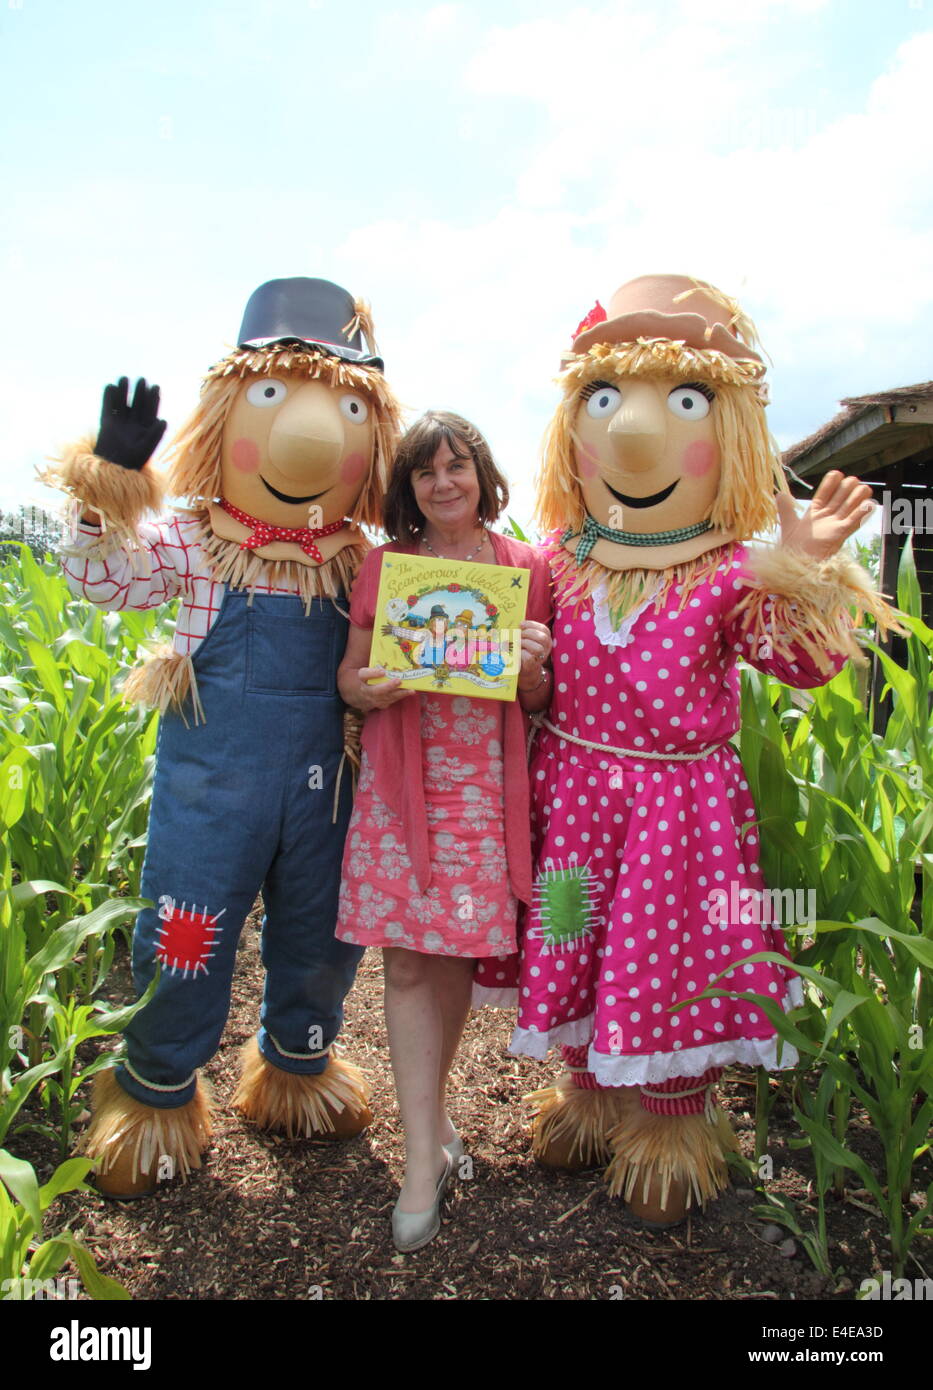 Burton-on-Trent, Staffordshire, UK. 9th July, 2014. Julia Donaldson with Harry O'Hay and Betty O'Barley. The National Forest Adventure Farm launches its 11th annual 10-acre maize maze that, this year, celebrates publication of The Scarecrows' Wedding book from the creators of The Gruffalo & Stick Man. Designed in the shape of The Scarecrows' Wedding characters Betty O'Barley and Harry O'Hay, the maze features three miles of pathways, bridges & viewing towers. Credit:  Deborah Vernon/Alamy Live News Stock Photo